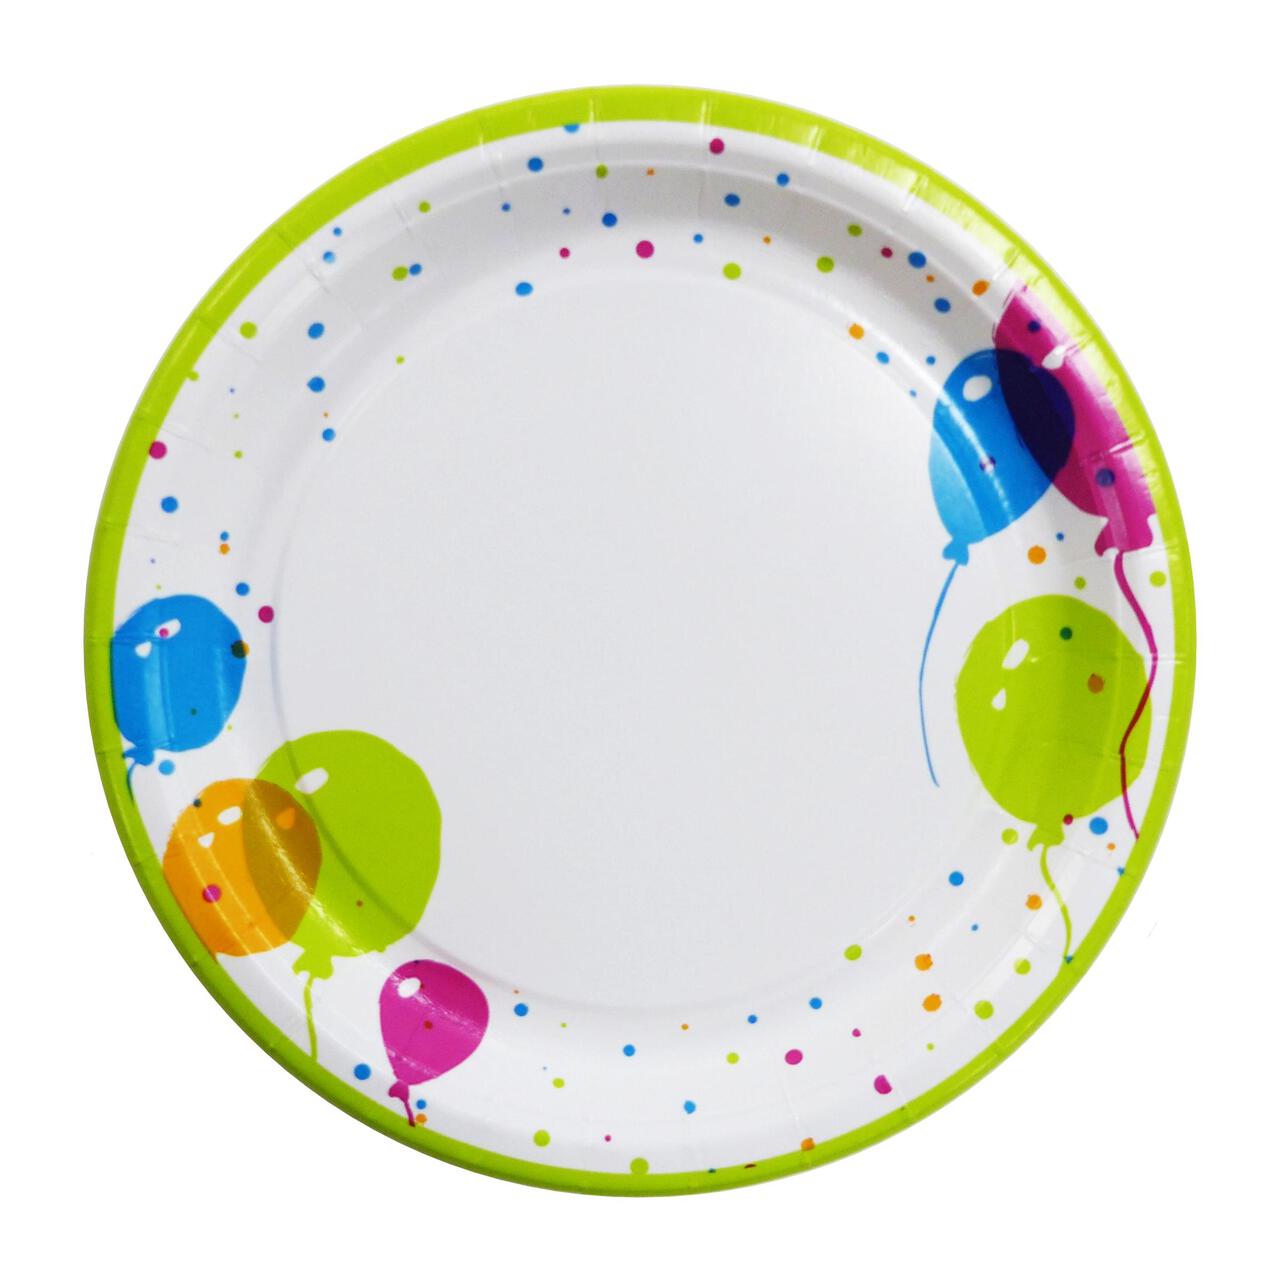 Bio Balloons Recyclable Paper Plate 22cm 10 per pack